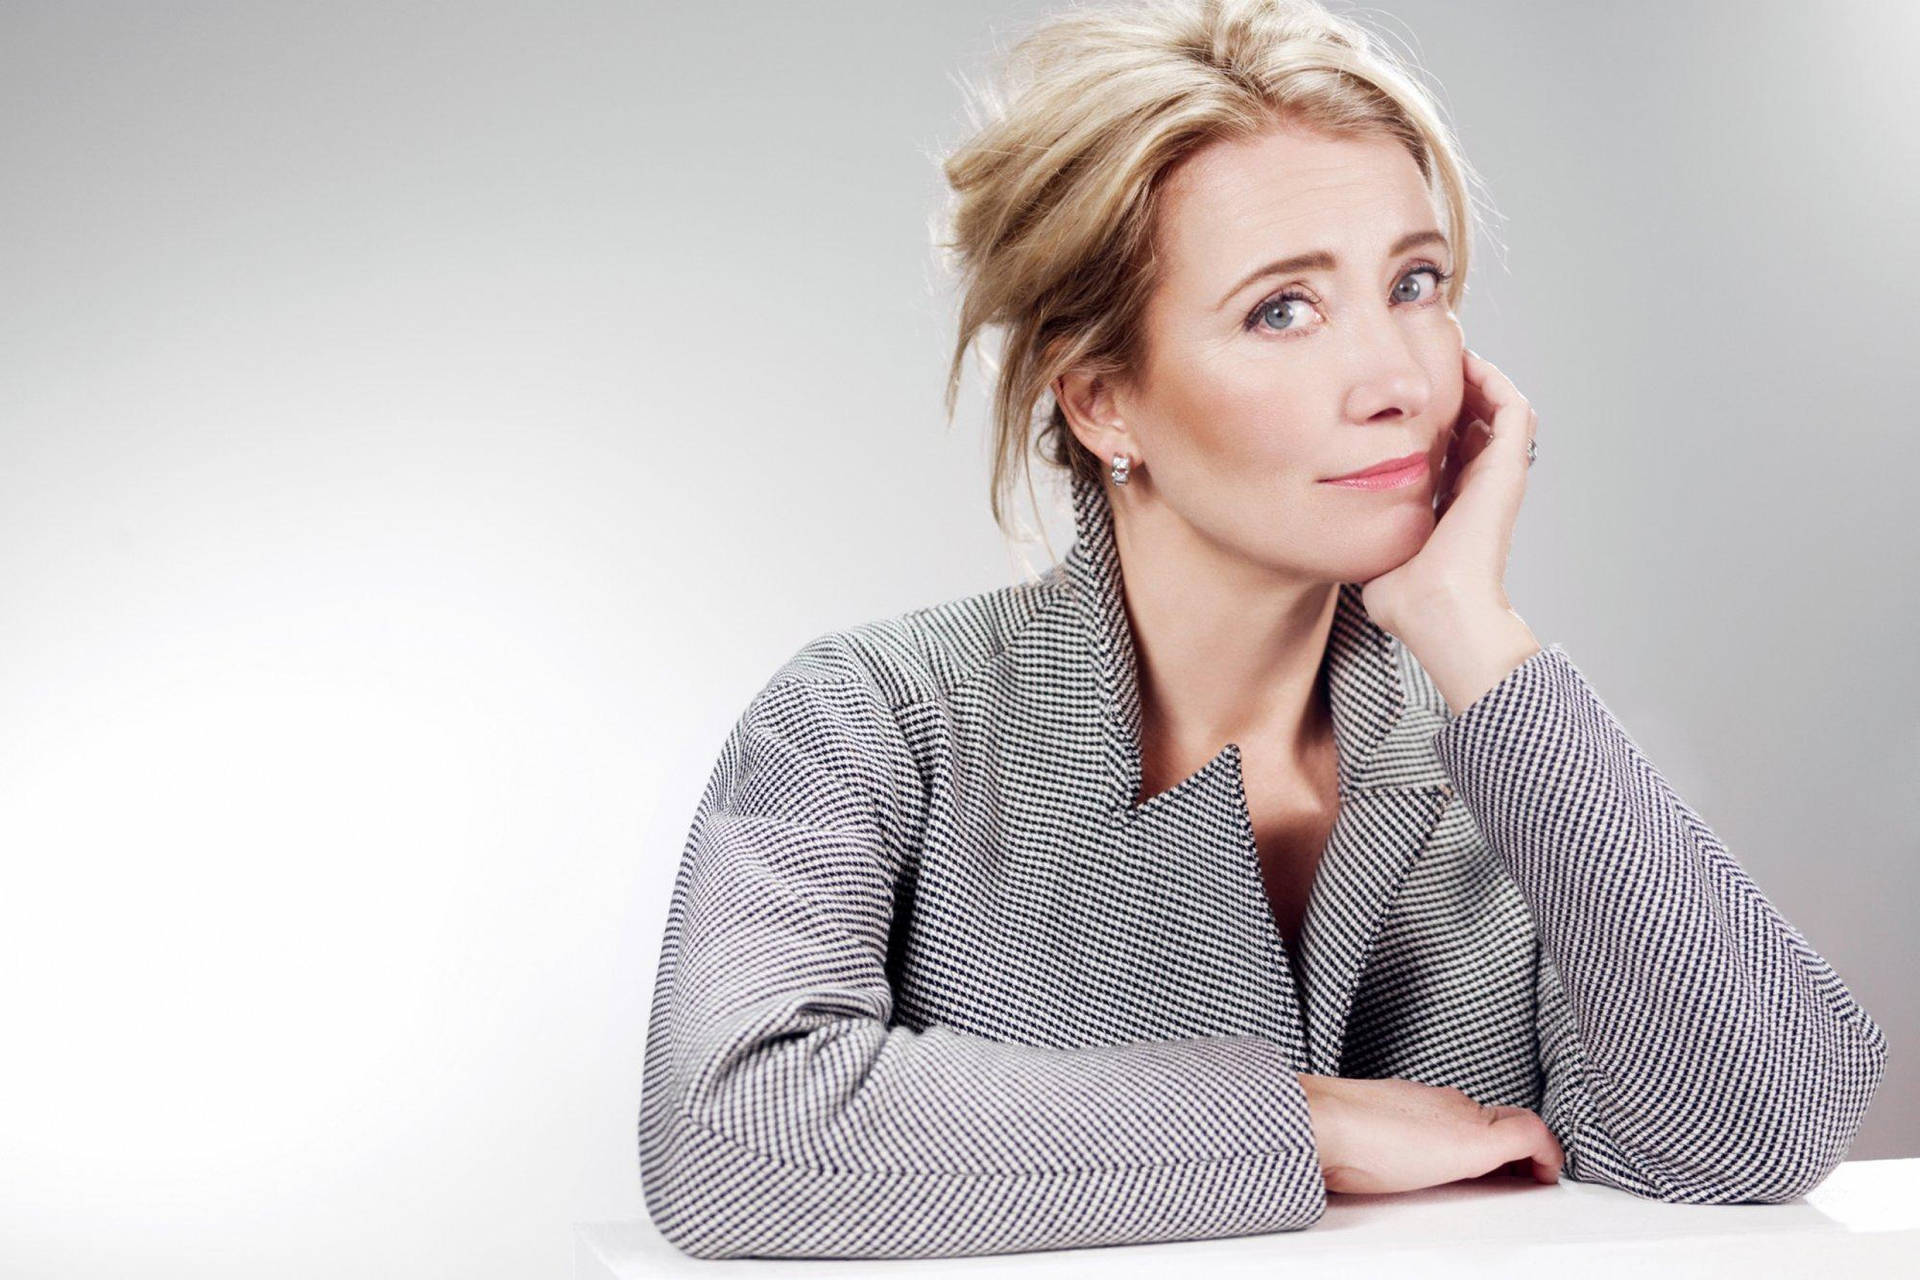 Emma Thompson With a Radiant Smile Wallpaper